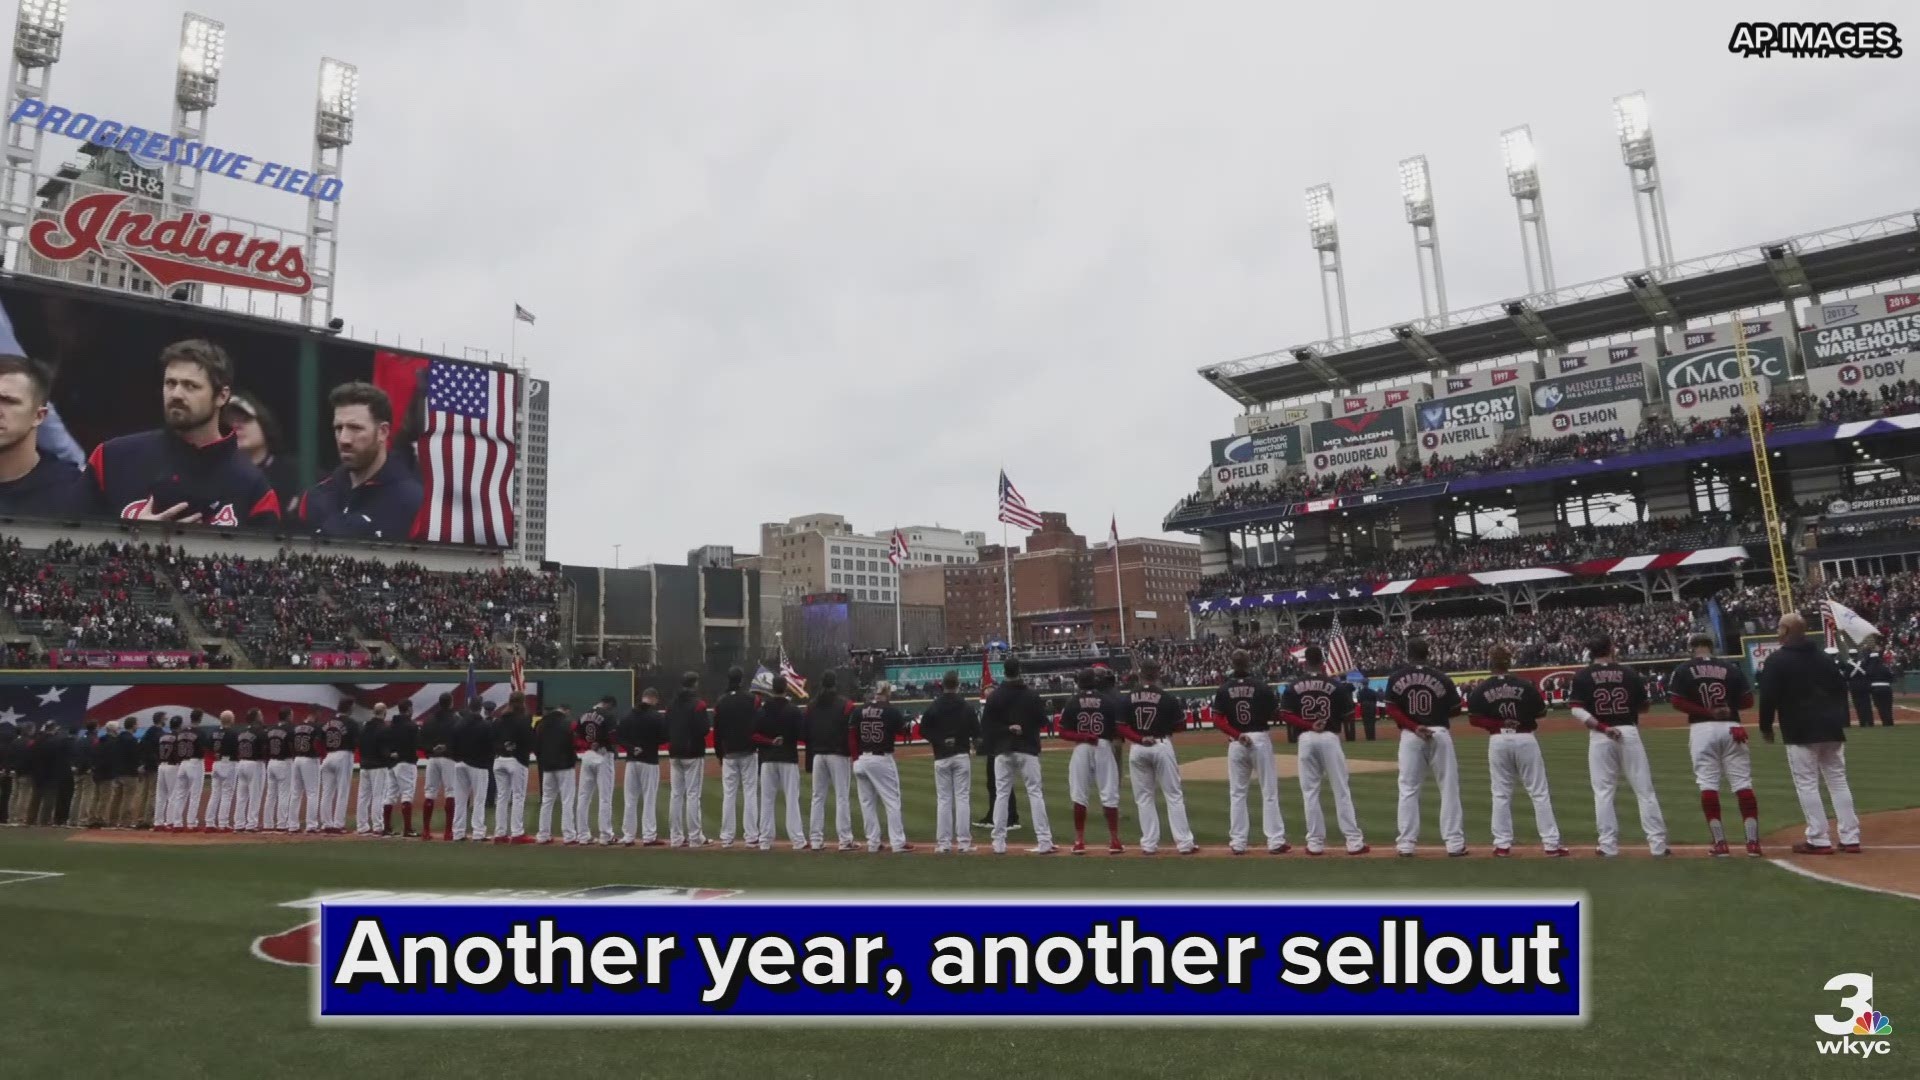 The Cleveland Indians will host their 2019 home opener on April 1 when they host the Chicago White Sox.